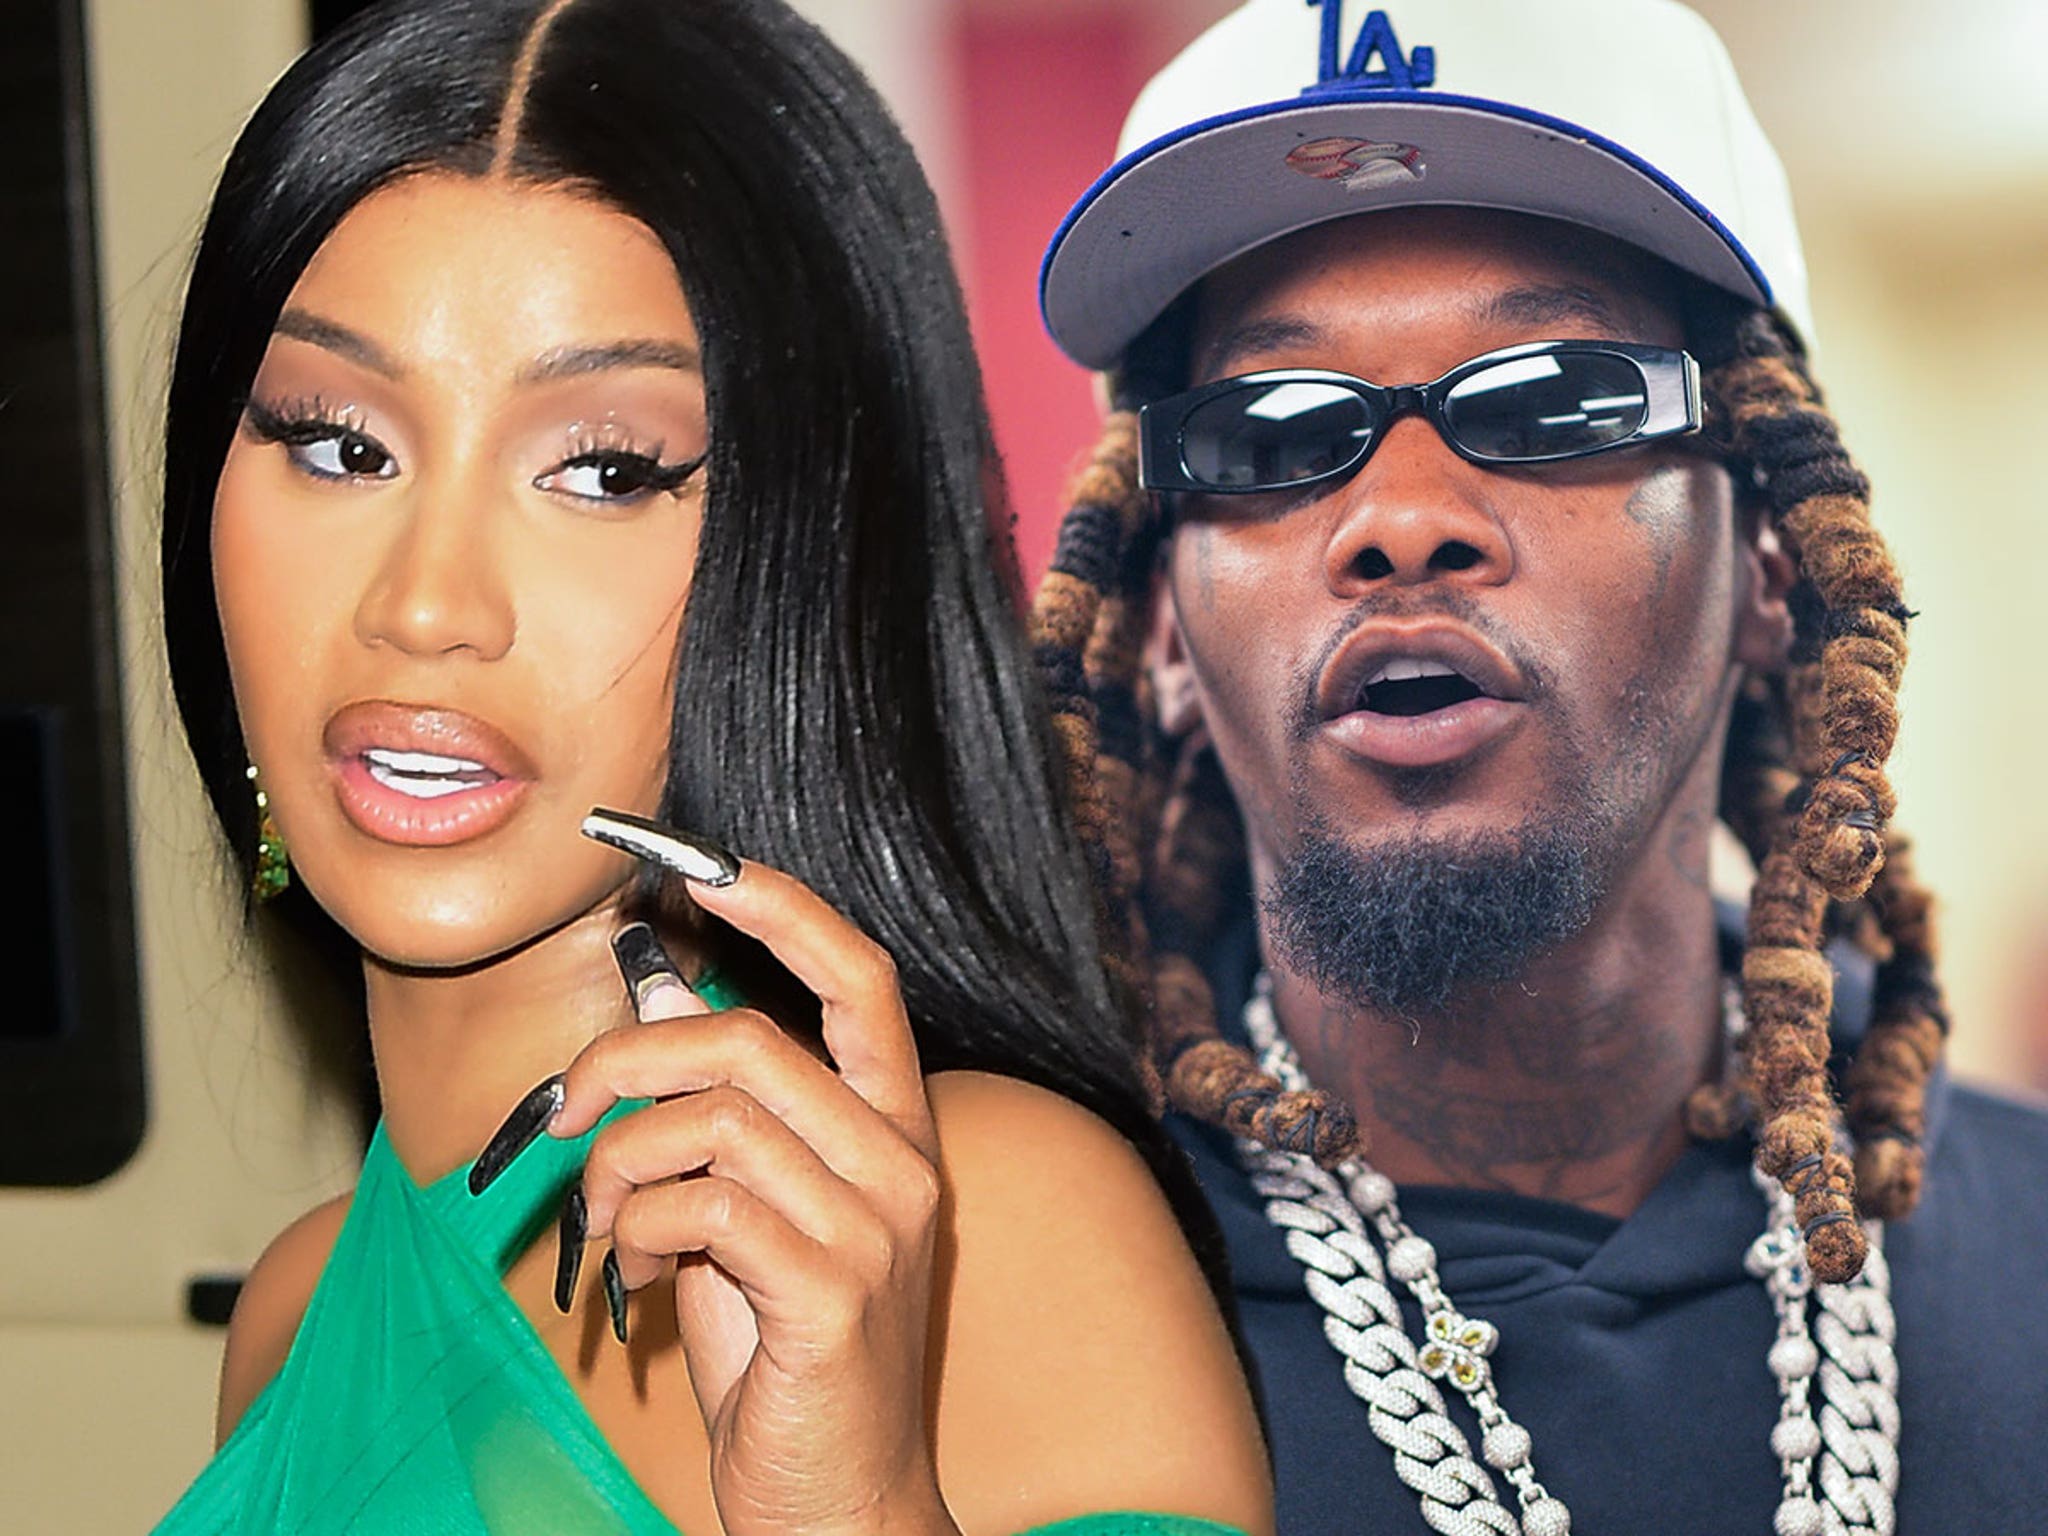 Cardi B Unloads on Offset in Emotional Rant After Split, 'Doing Me Dirty'